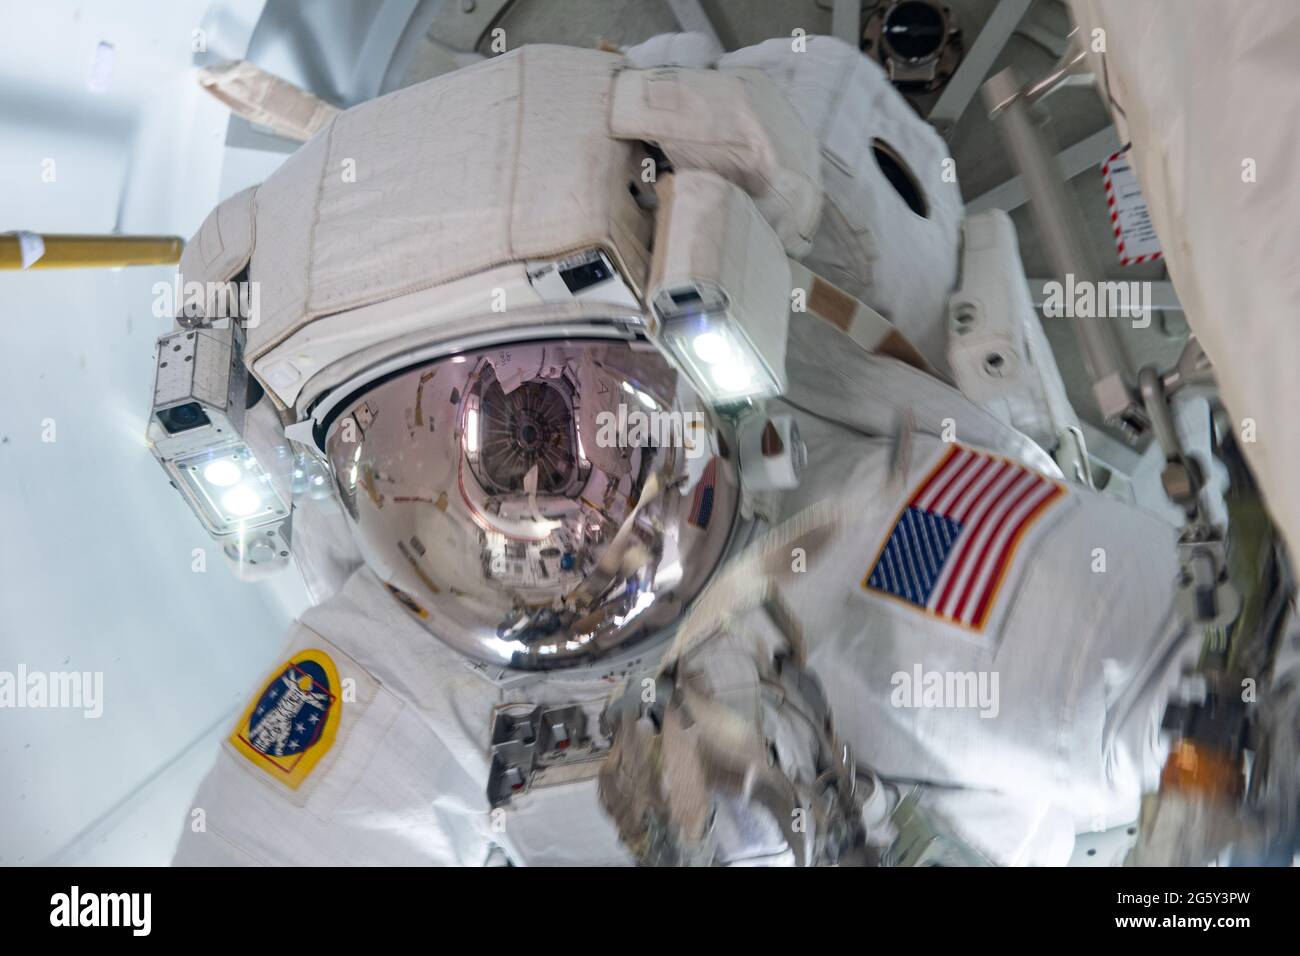 NASA astronaut Shane Kimbrough in the Quest airlock after he and ESA astronaut Thomas Pesquet, completed the installation of the second roll out solar array on the International Space Station June 25, 2021 in Earth Orbit. Stock Photo